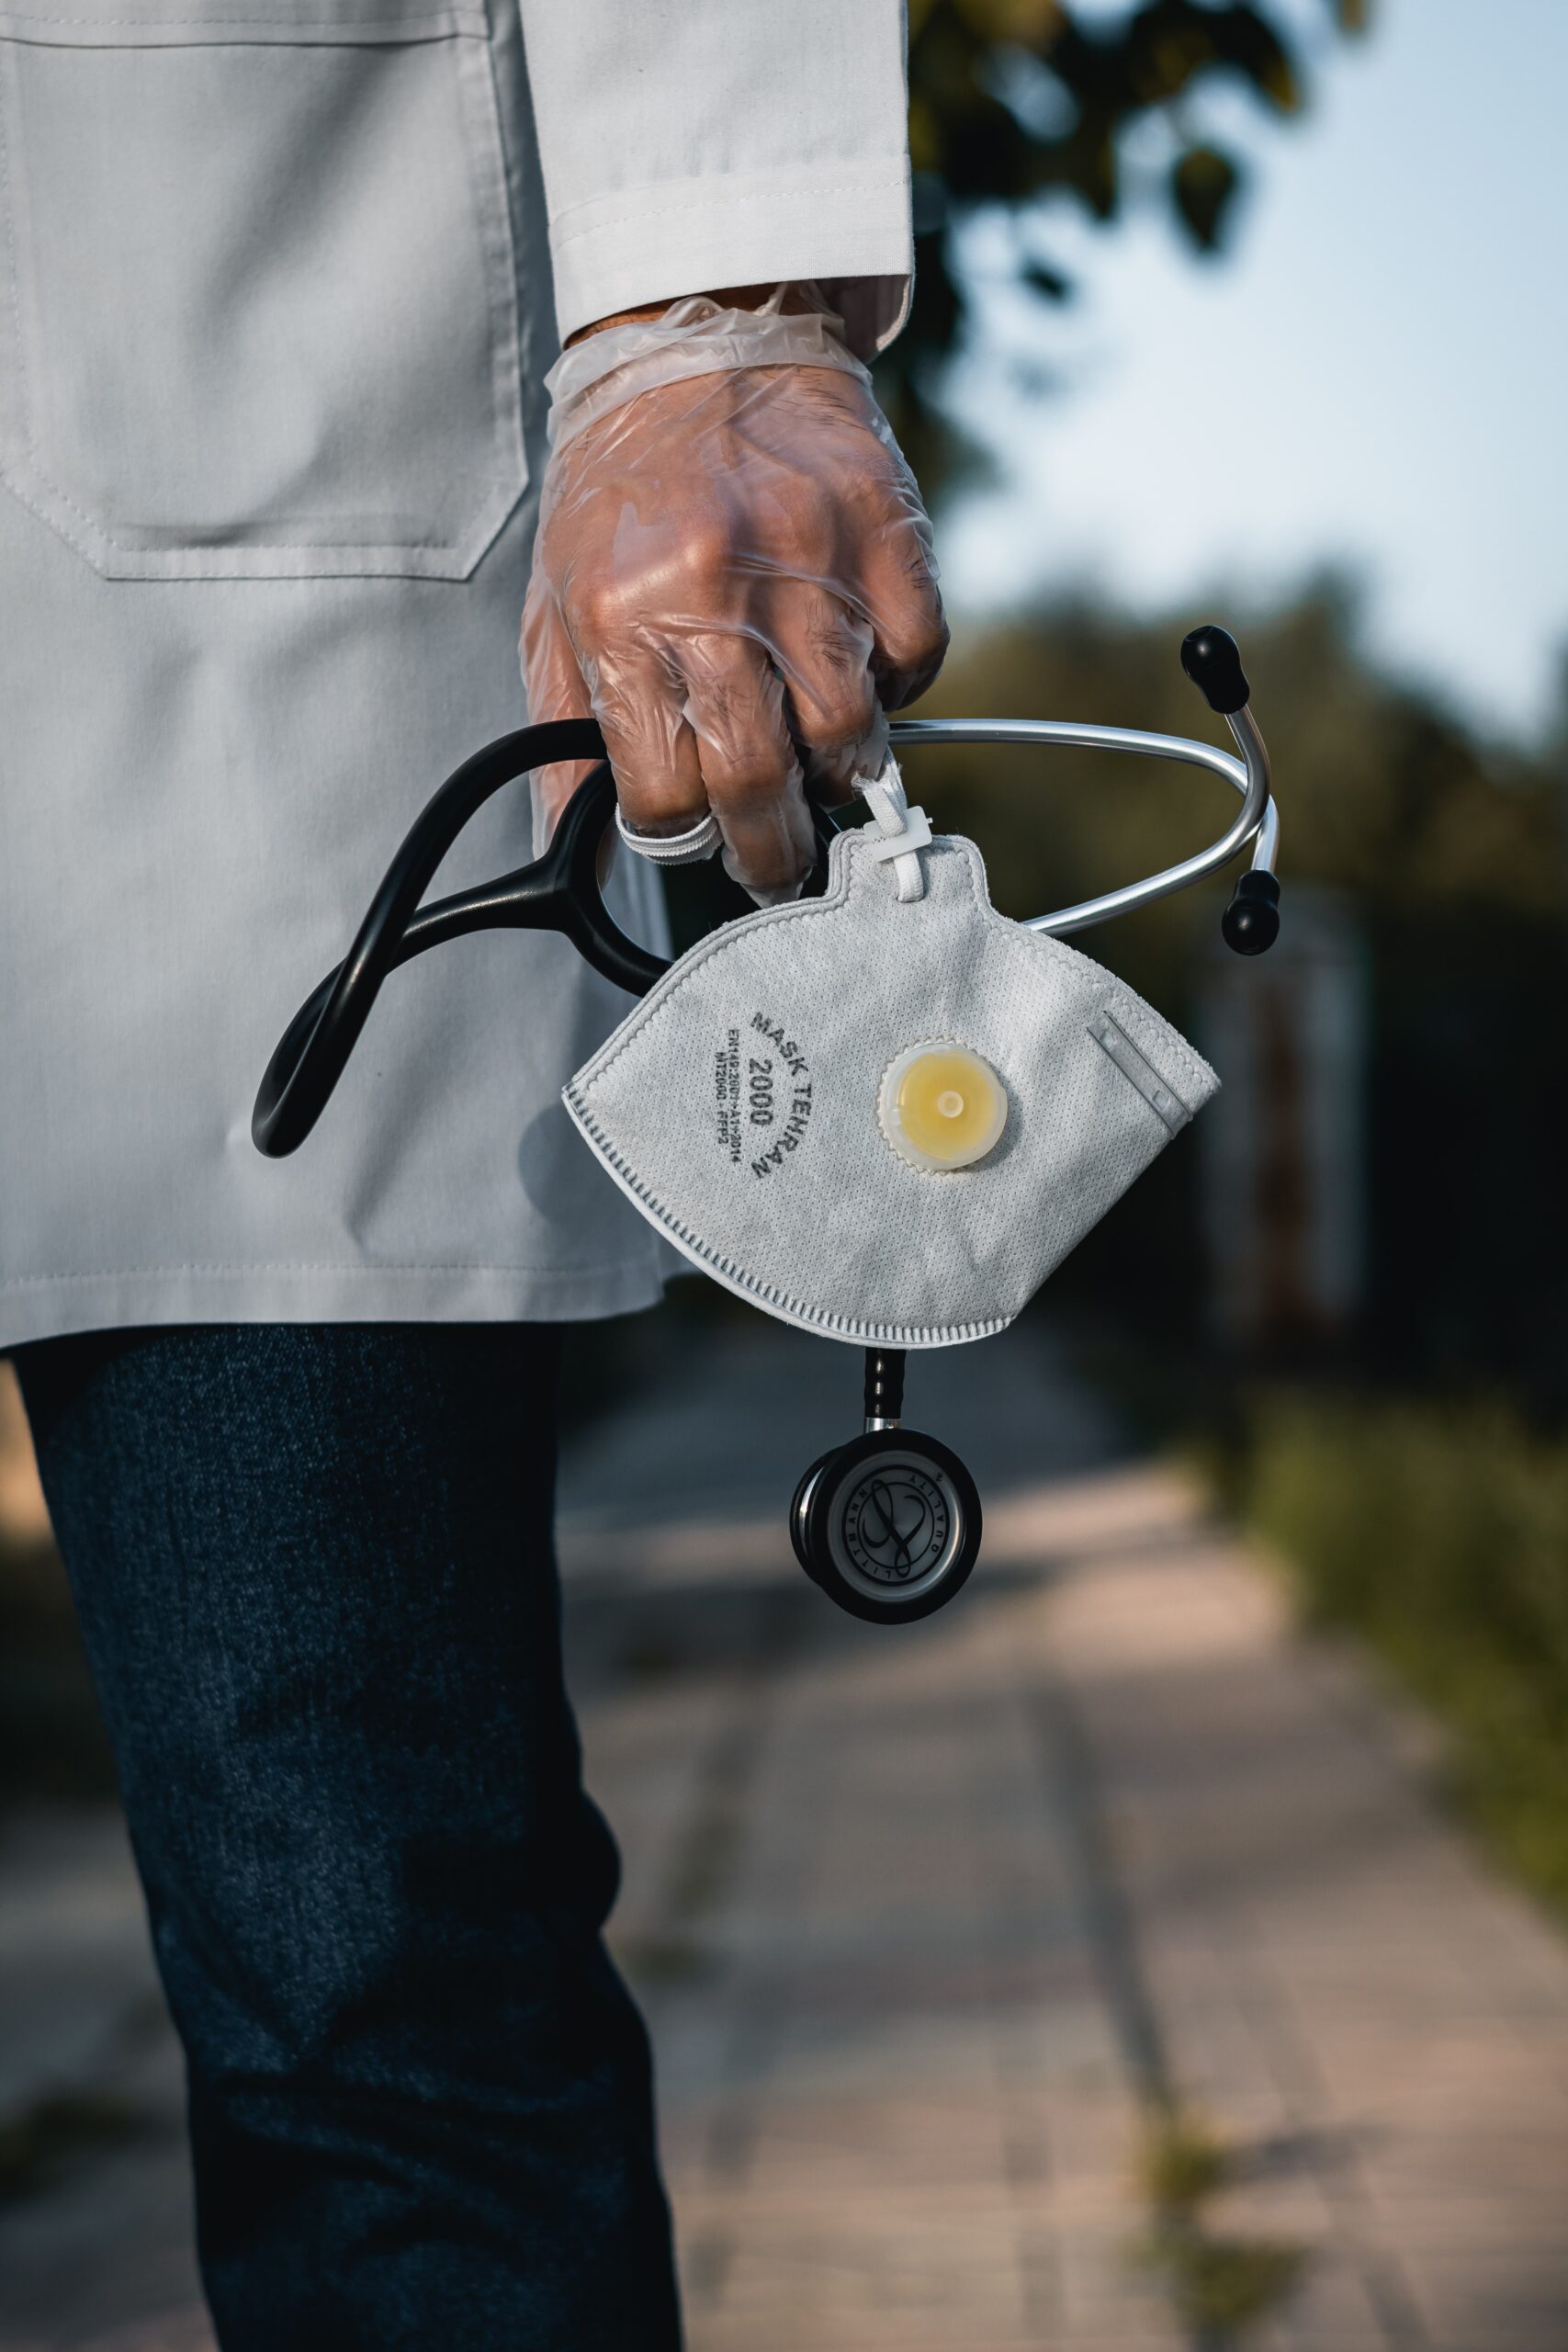 Picture of Doctor holding stethoscope and N95 mask